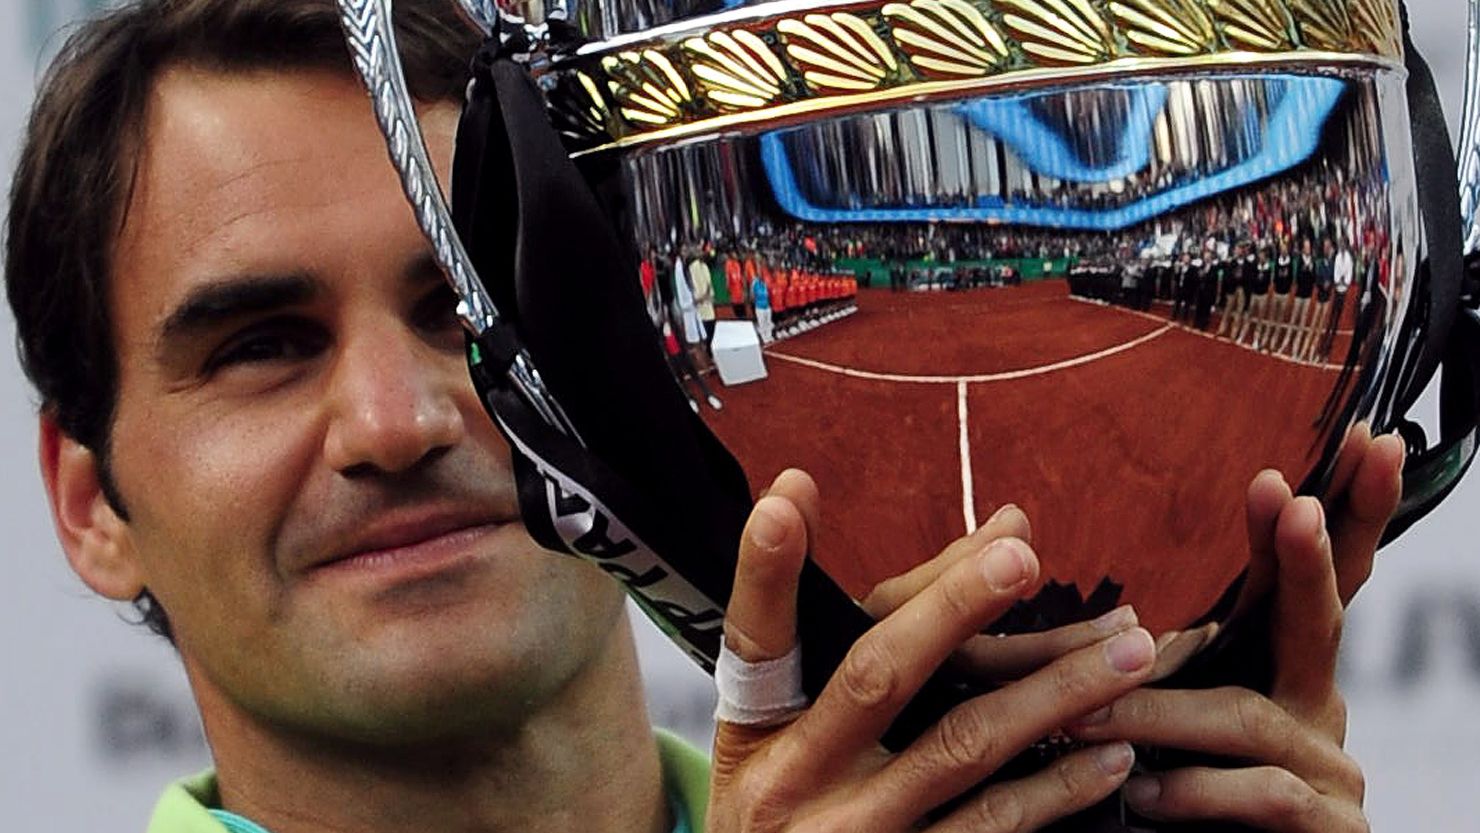 Roger Federer lifts his 85th ATP World Tour title with a straight sets win over Pablo Cuevas at the Istanbul Open.